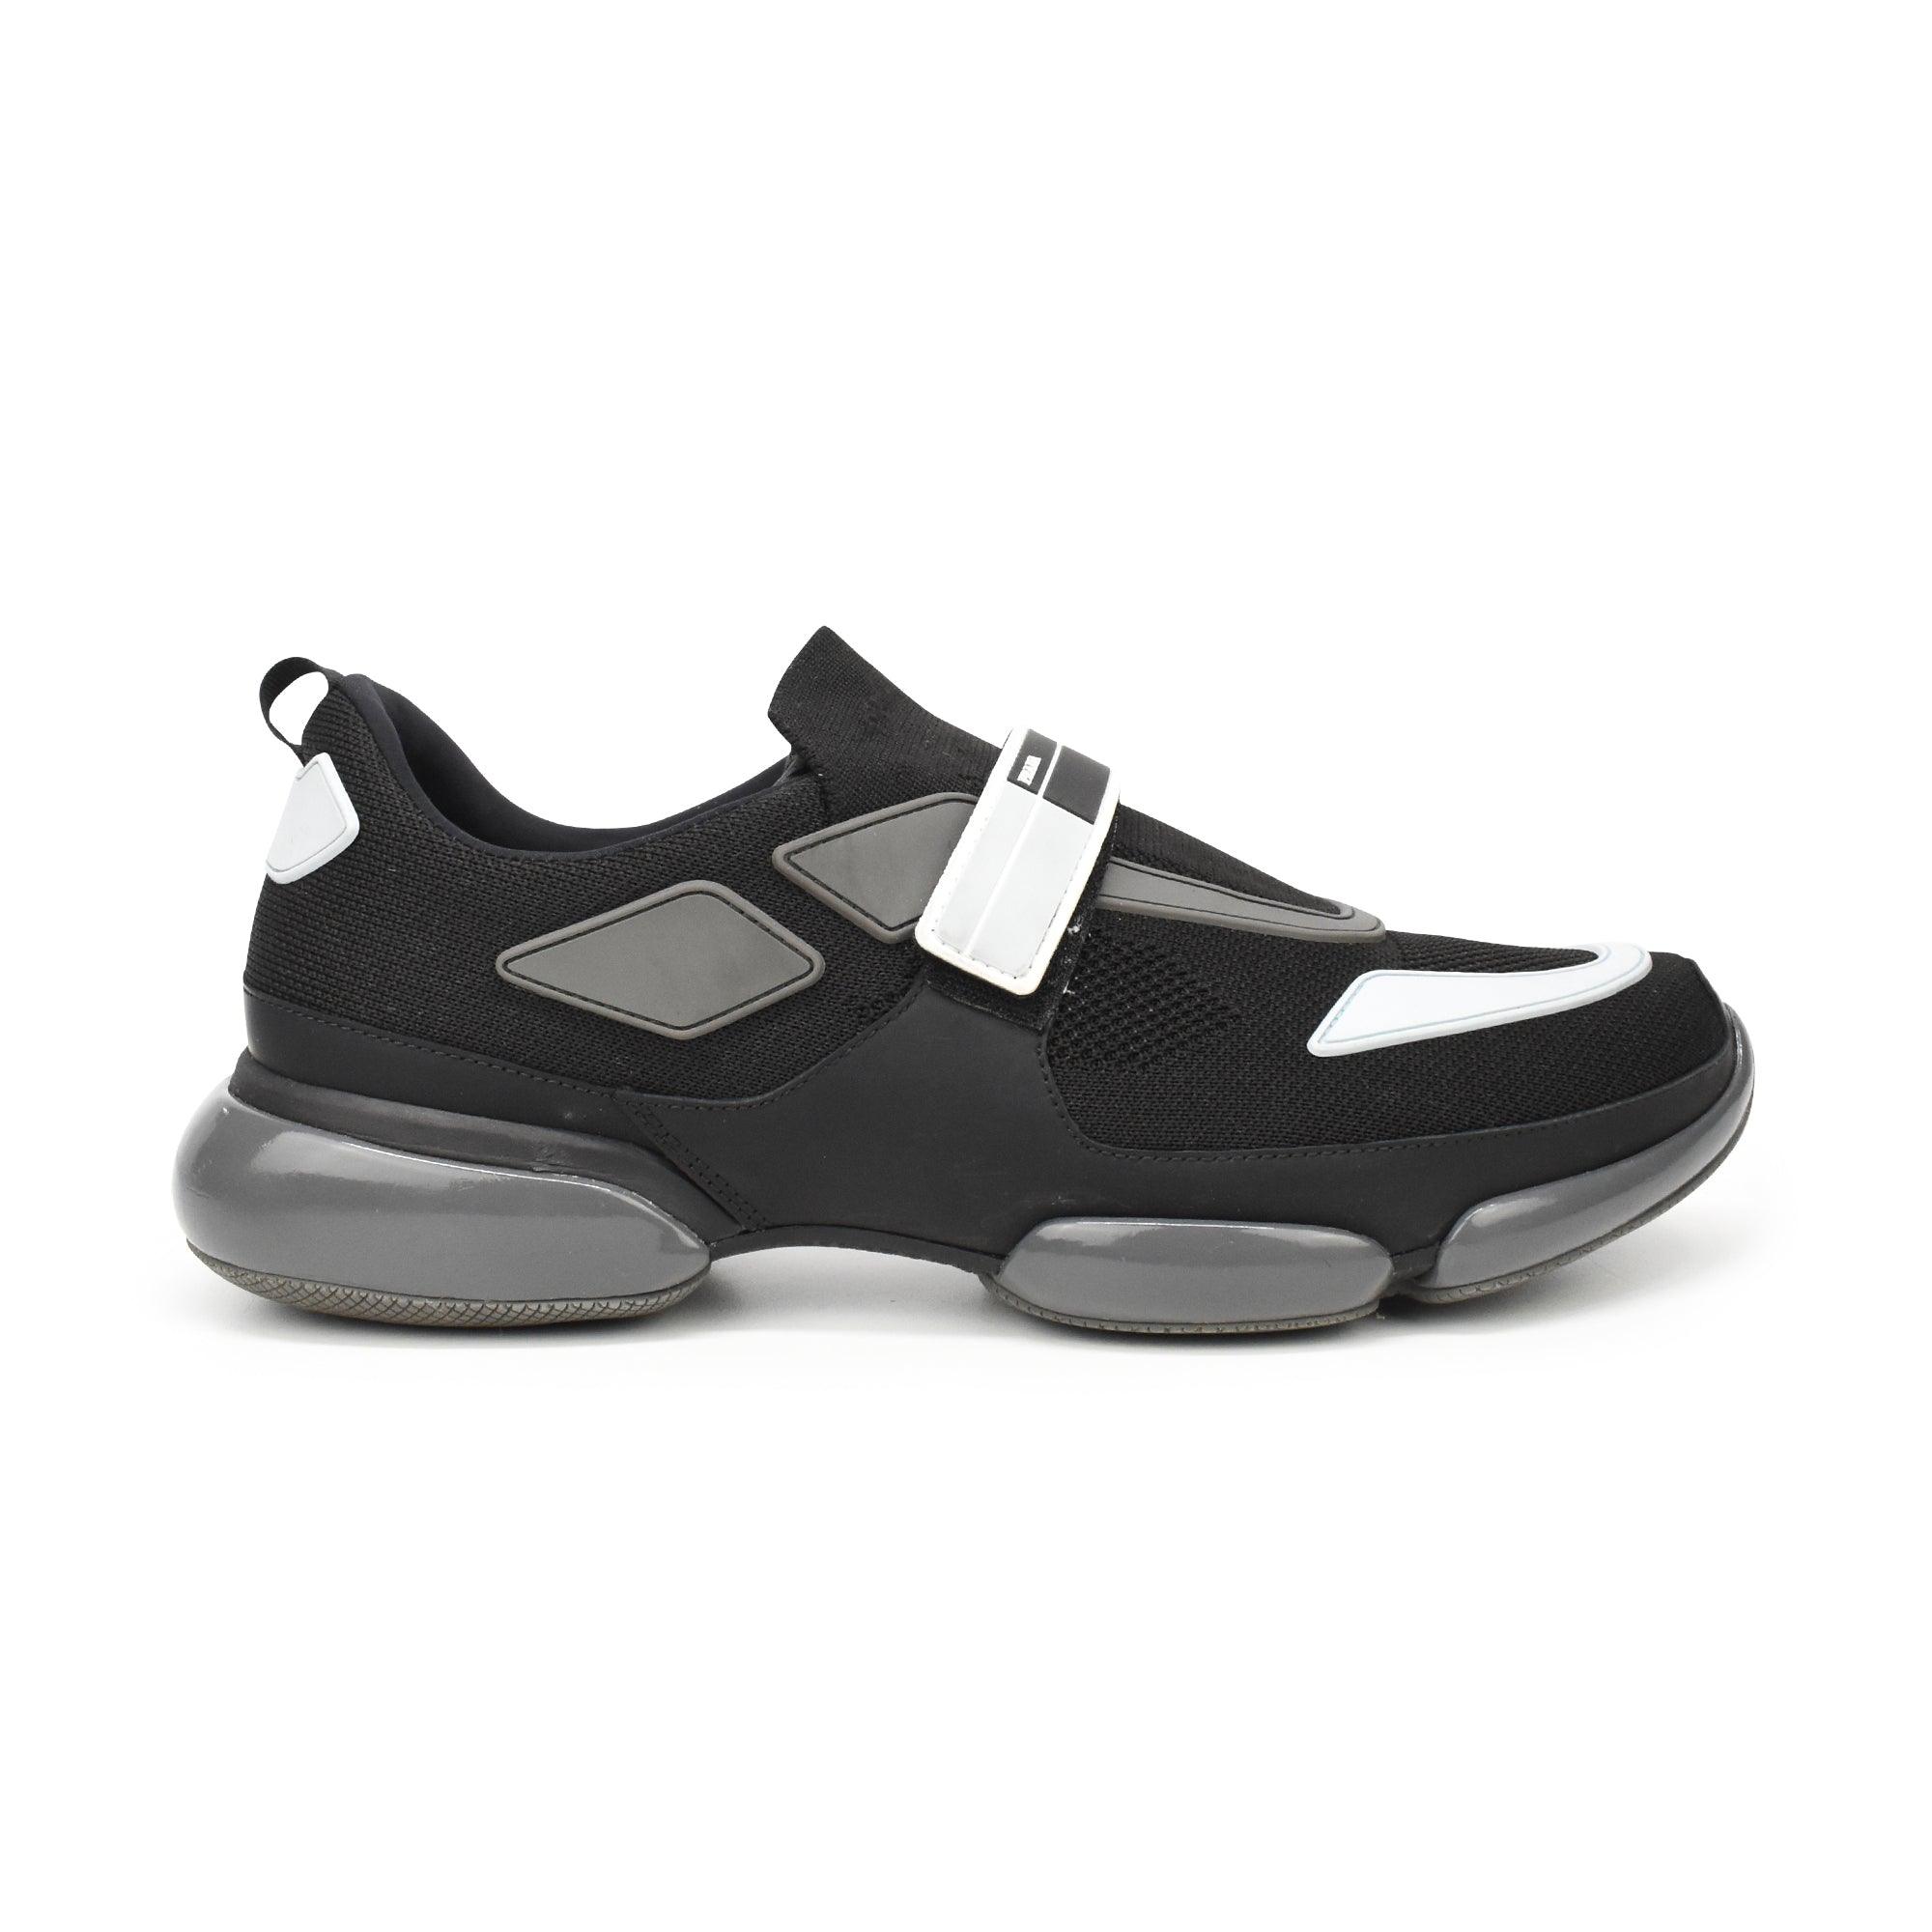 Prada 'Cloudbust Trainer' Sneakers - Men's 12 - Fashionably Yours